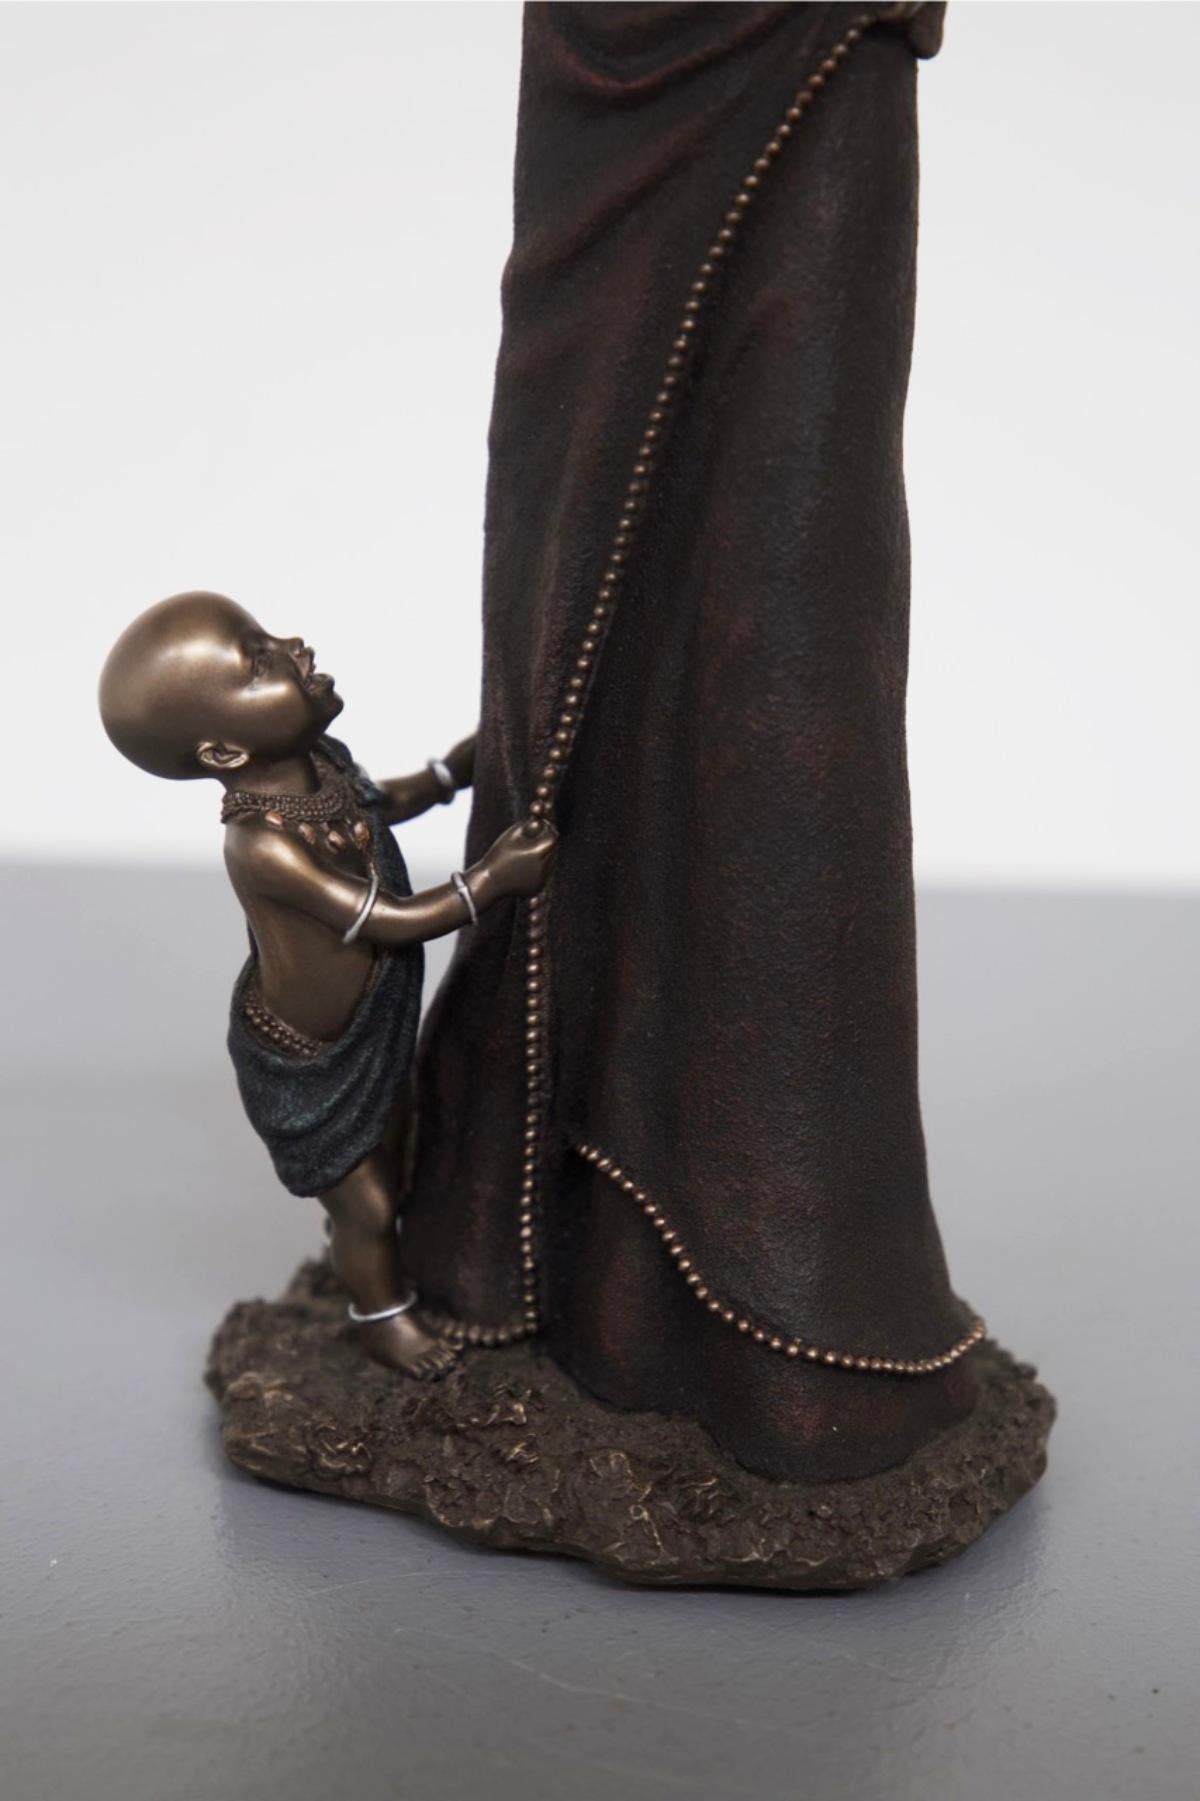 A splendid resin statue made by an unknown artist, in a limited edition. There is a label under the brass base specifying the edition number of the statue (1399/2000).
This statue represents the Maasai people, as specified on the label below.
The